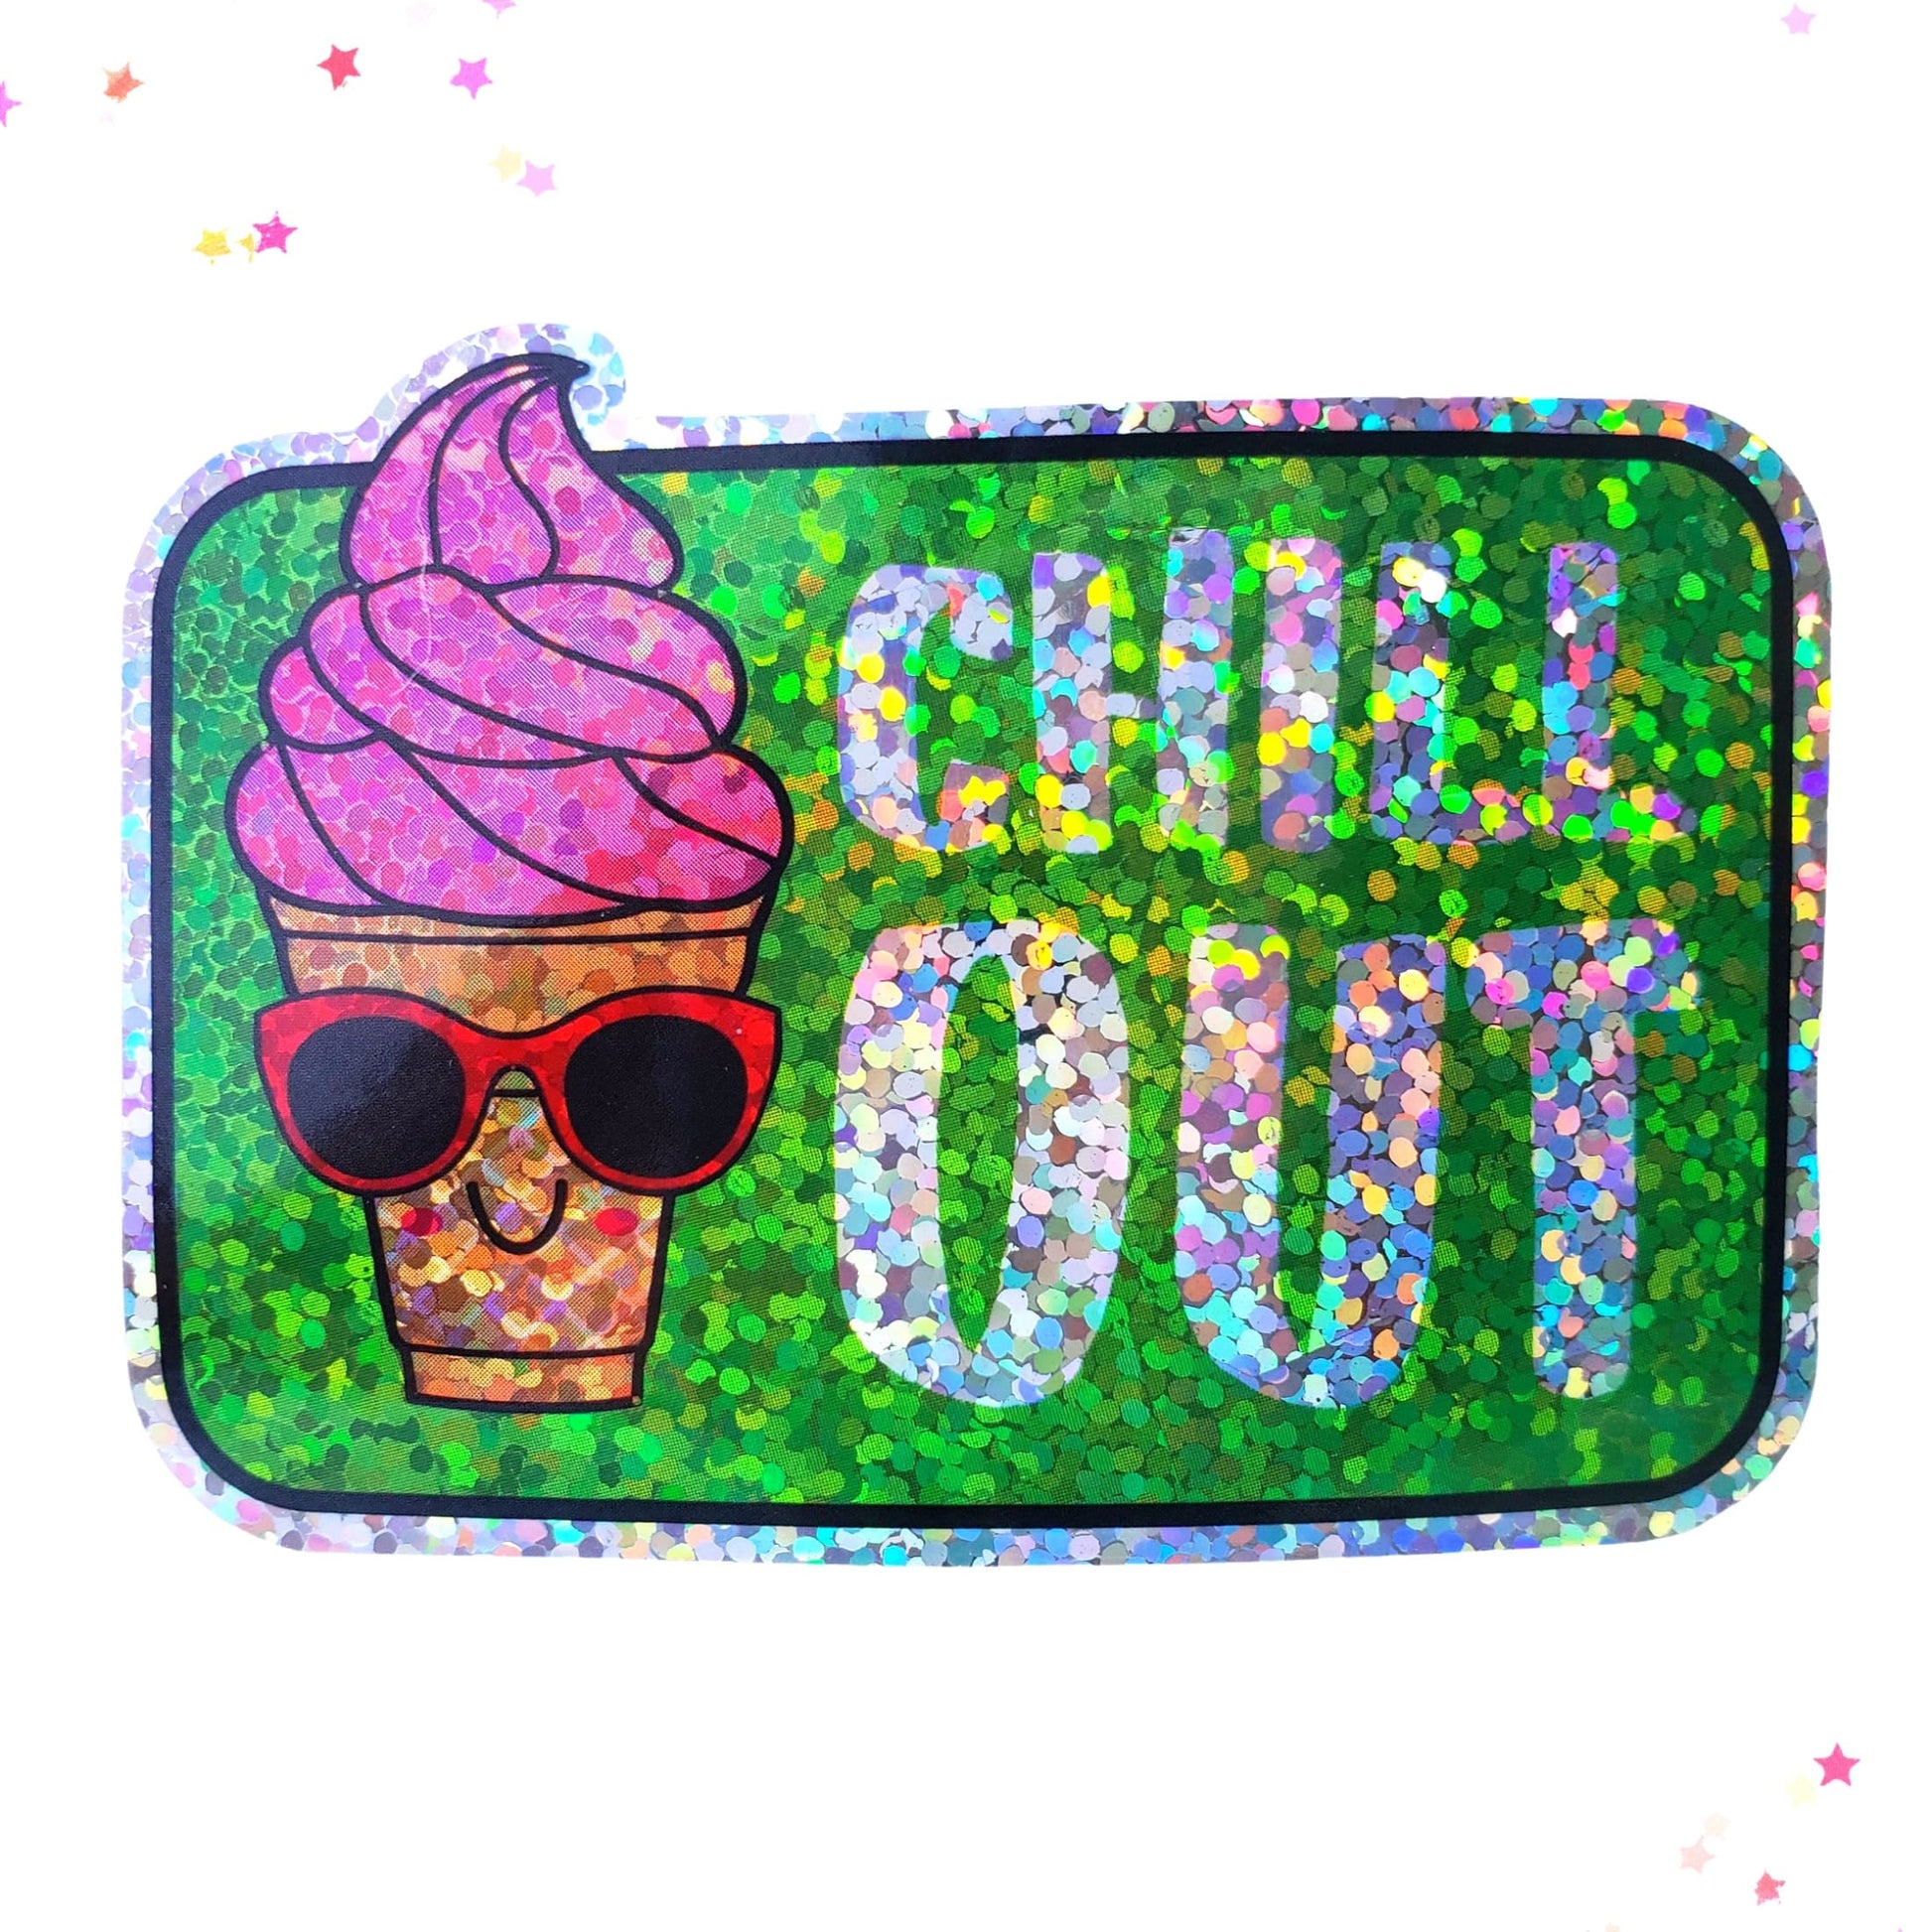 Premium Sticker - Sparkly Holographic Glitter Chill Out from Confetti Kitty, Only 2.00